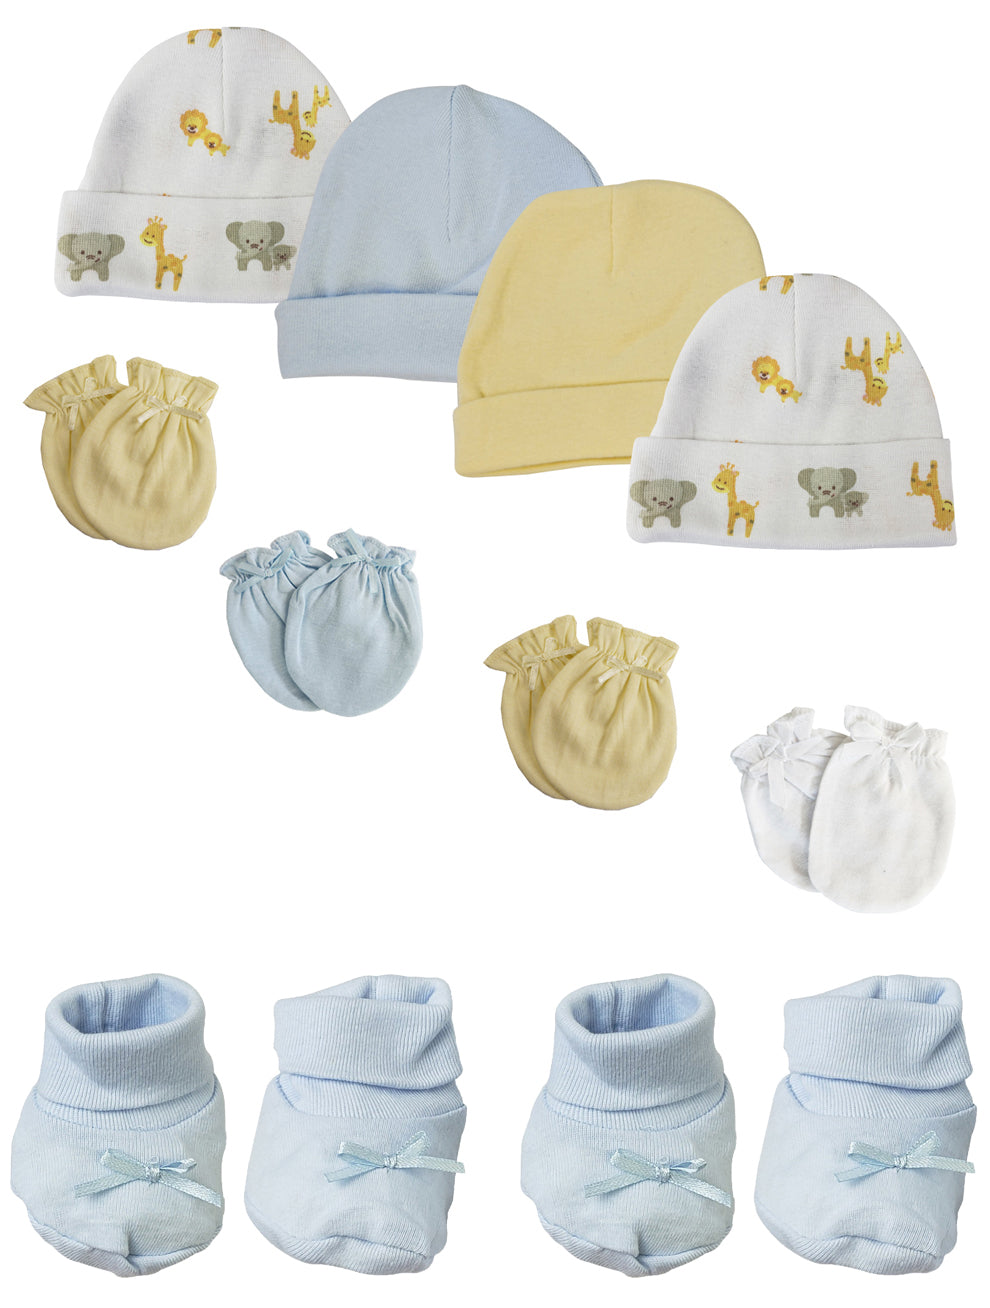 Preemie Baby Boy Caps with Infant Mittens and Booties - 10 Pack NC_0222